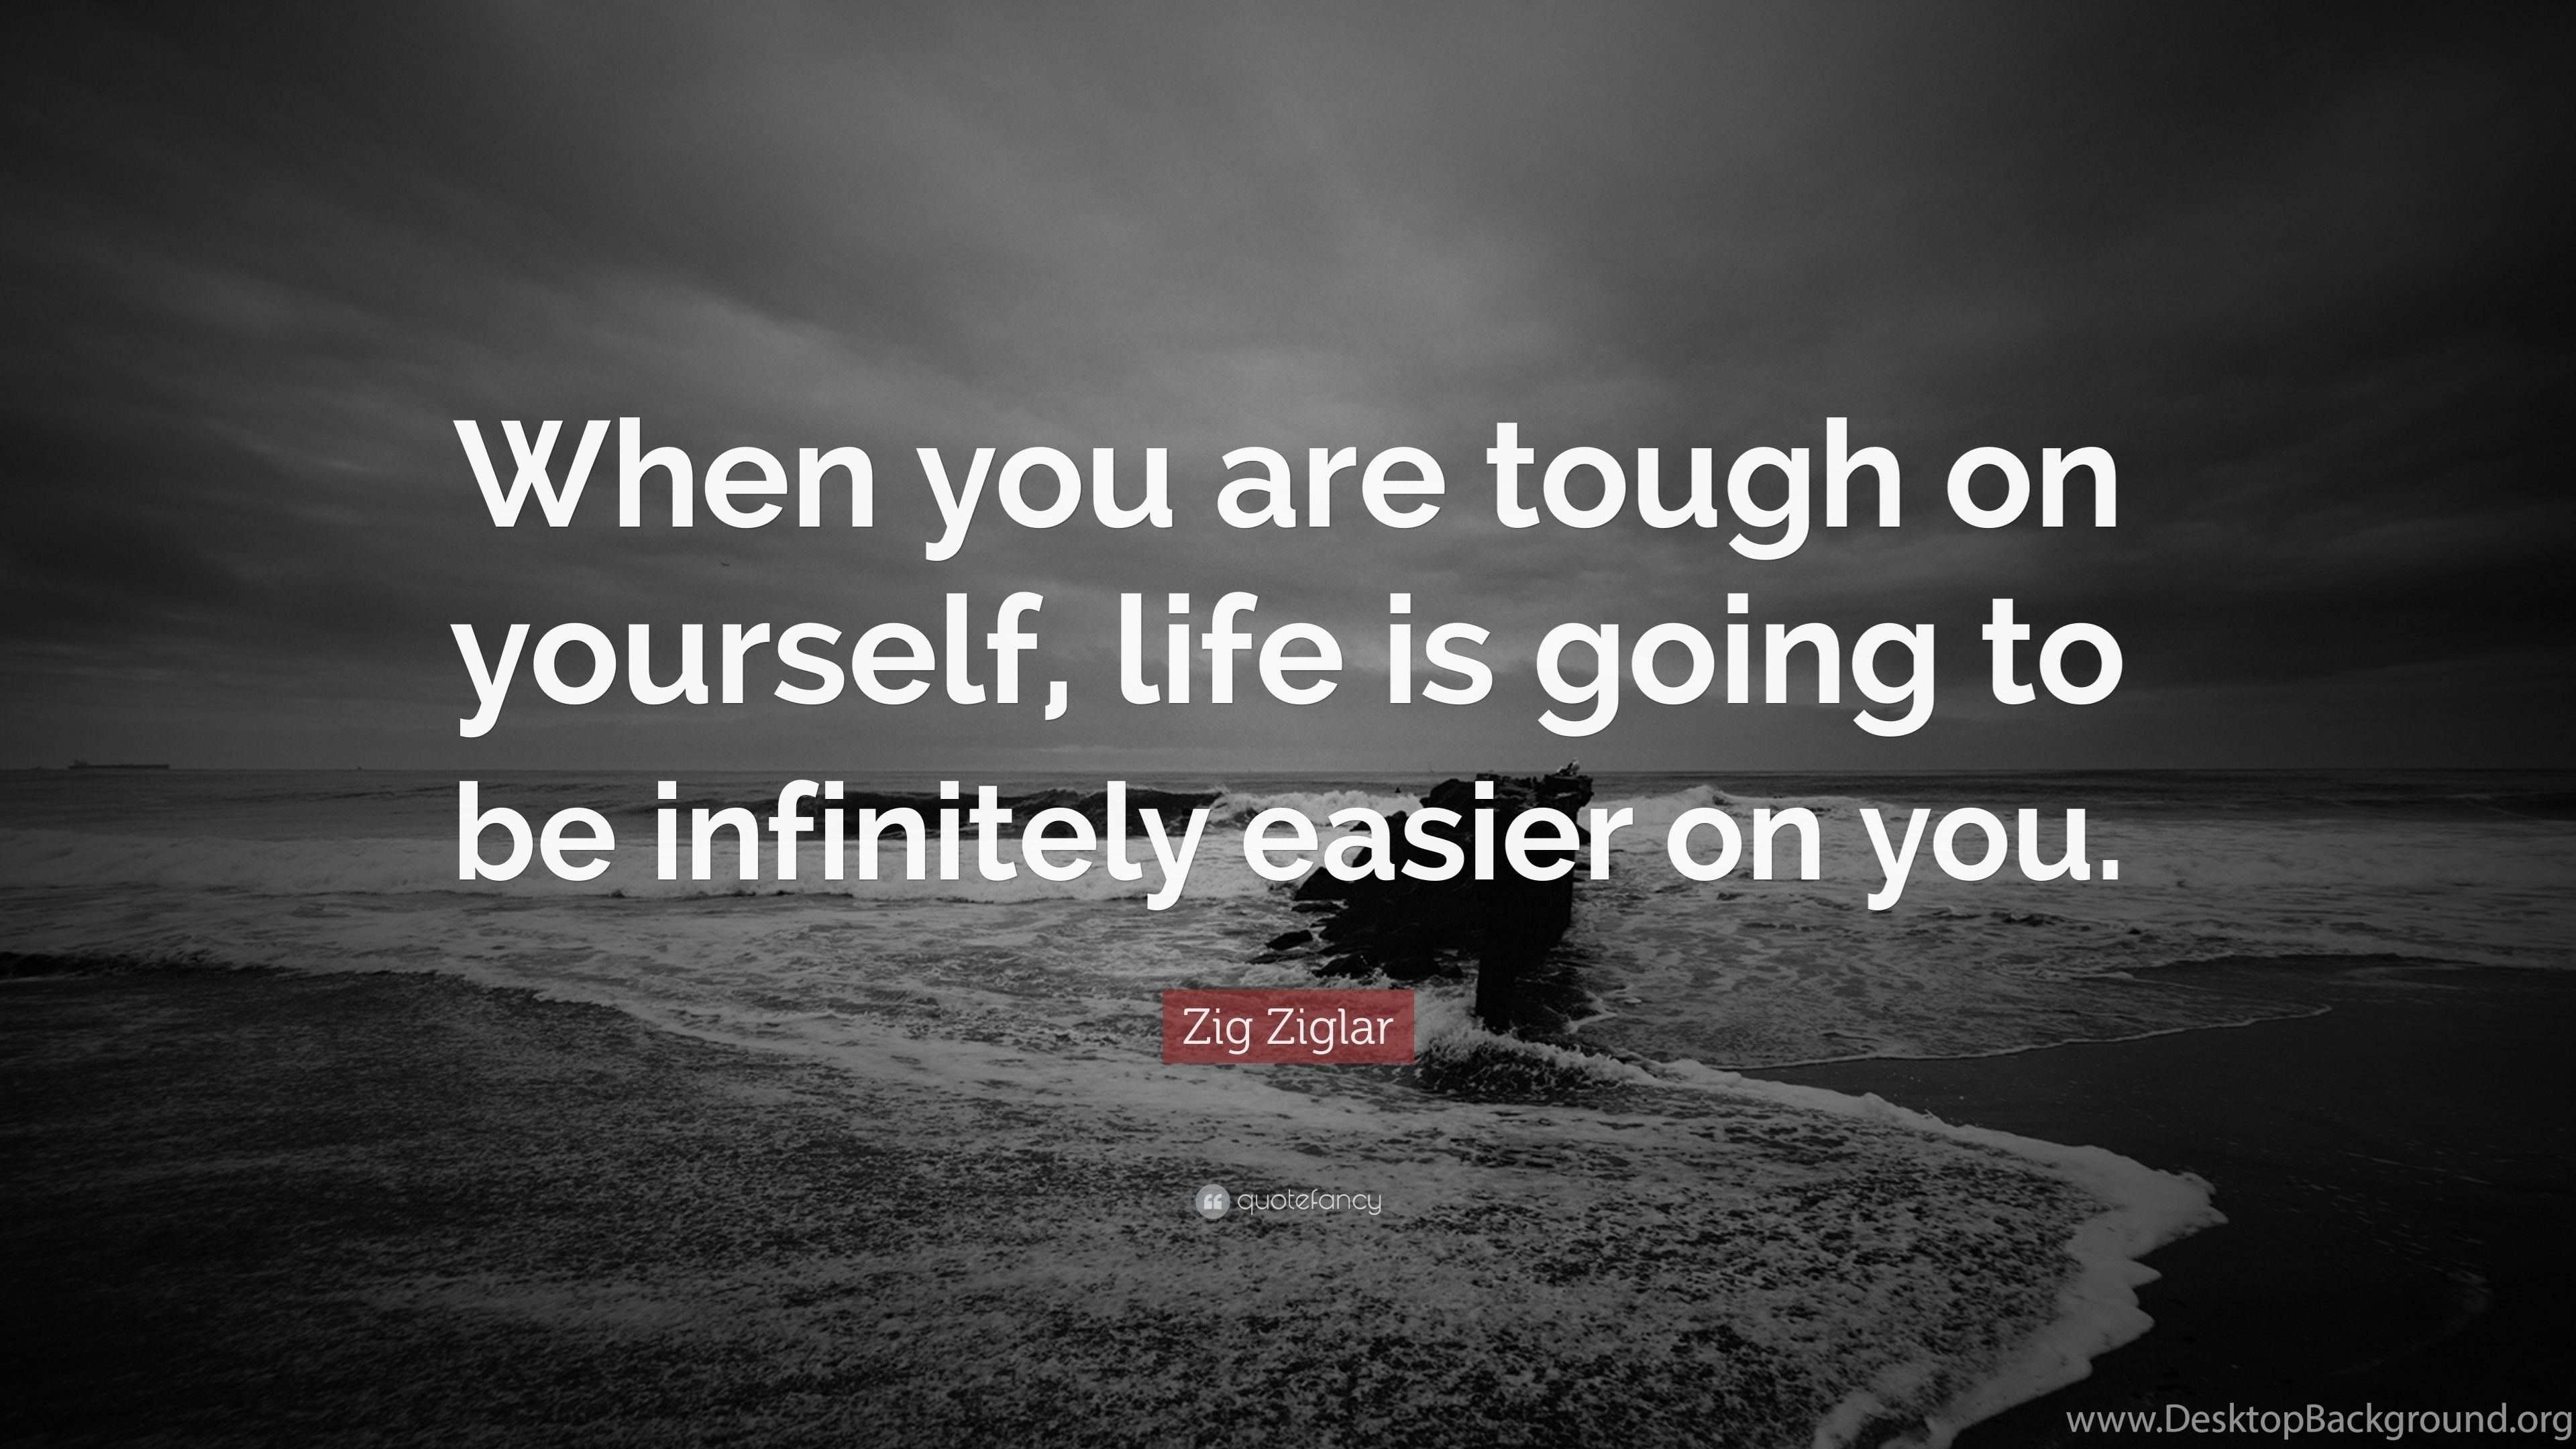 Download Zig Ziglar Quote: "When You Are Tough On Yourself, Life Is Go...